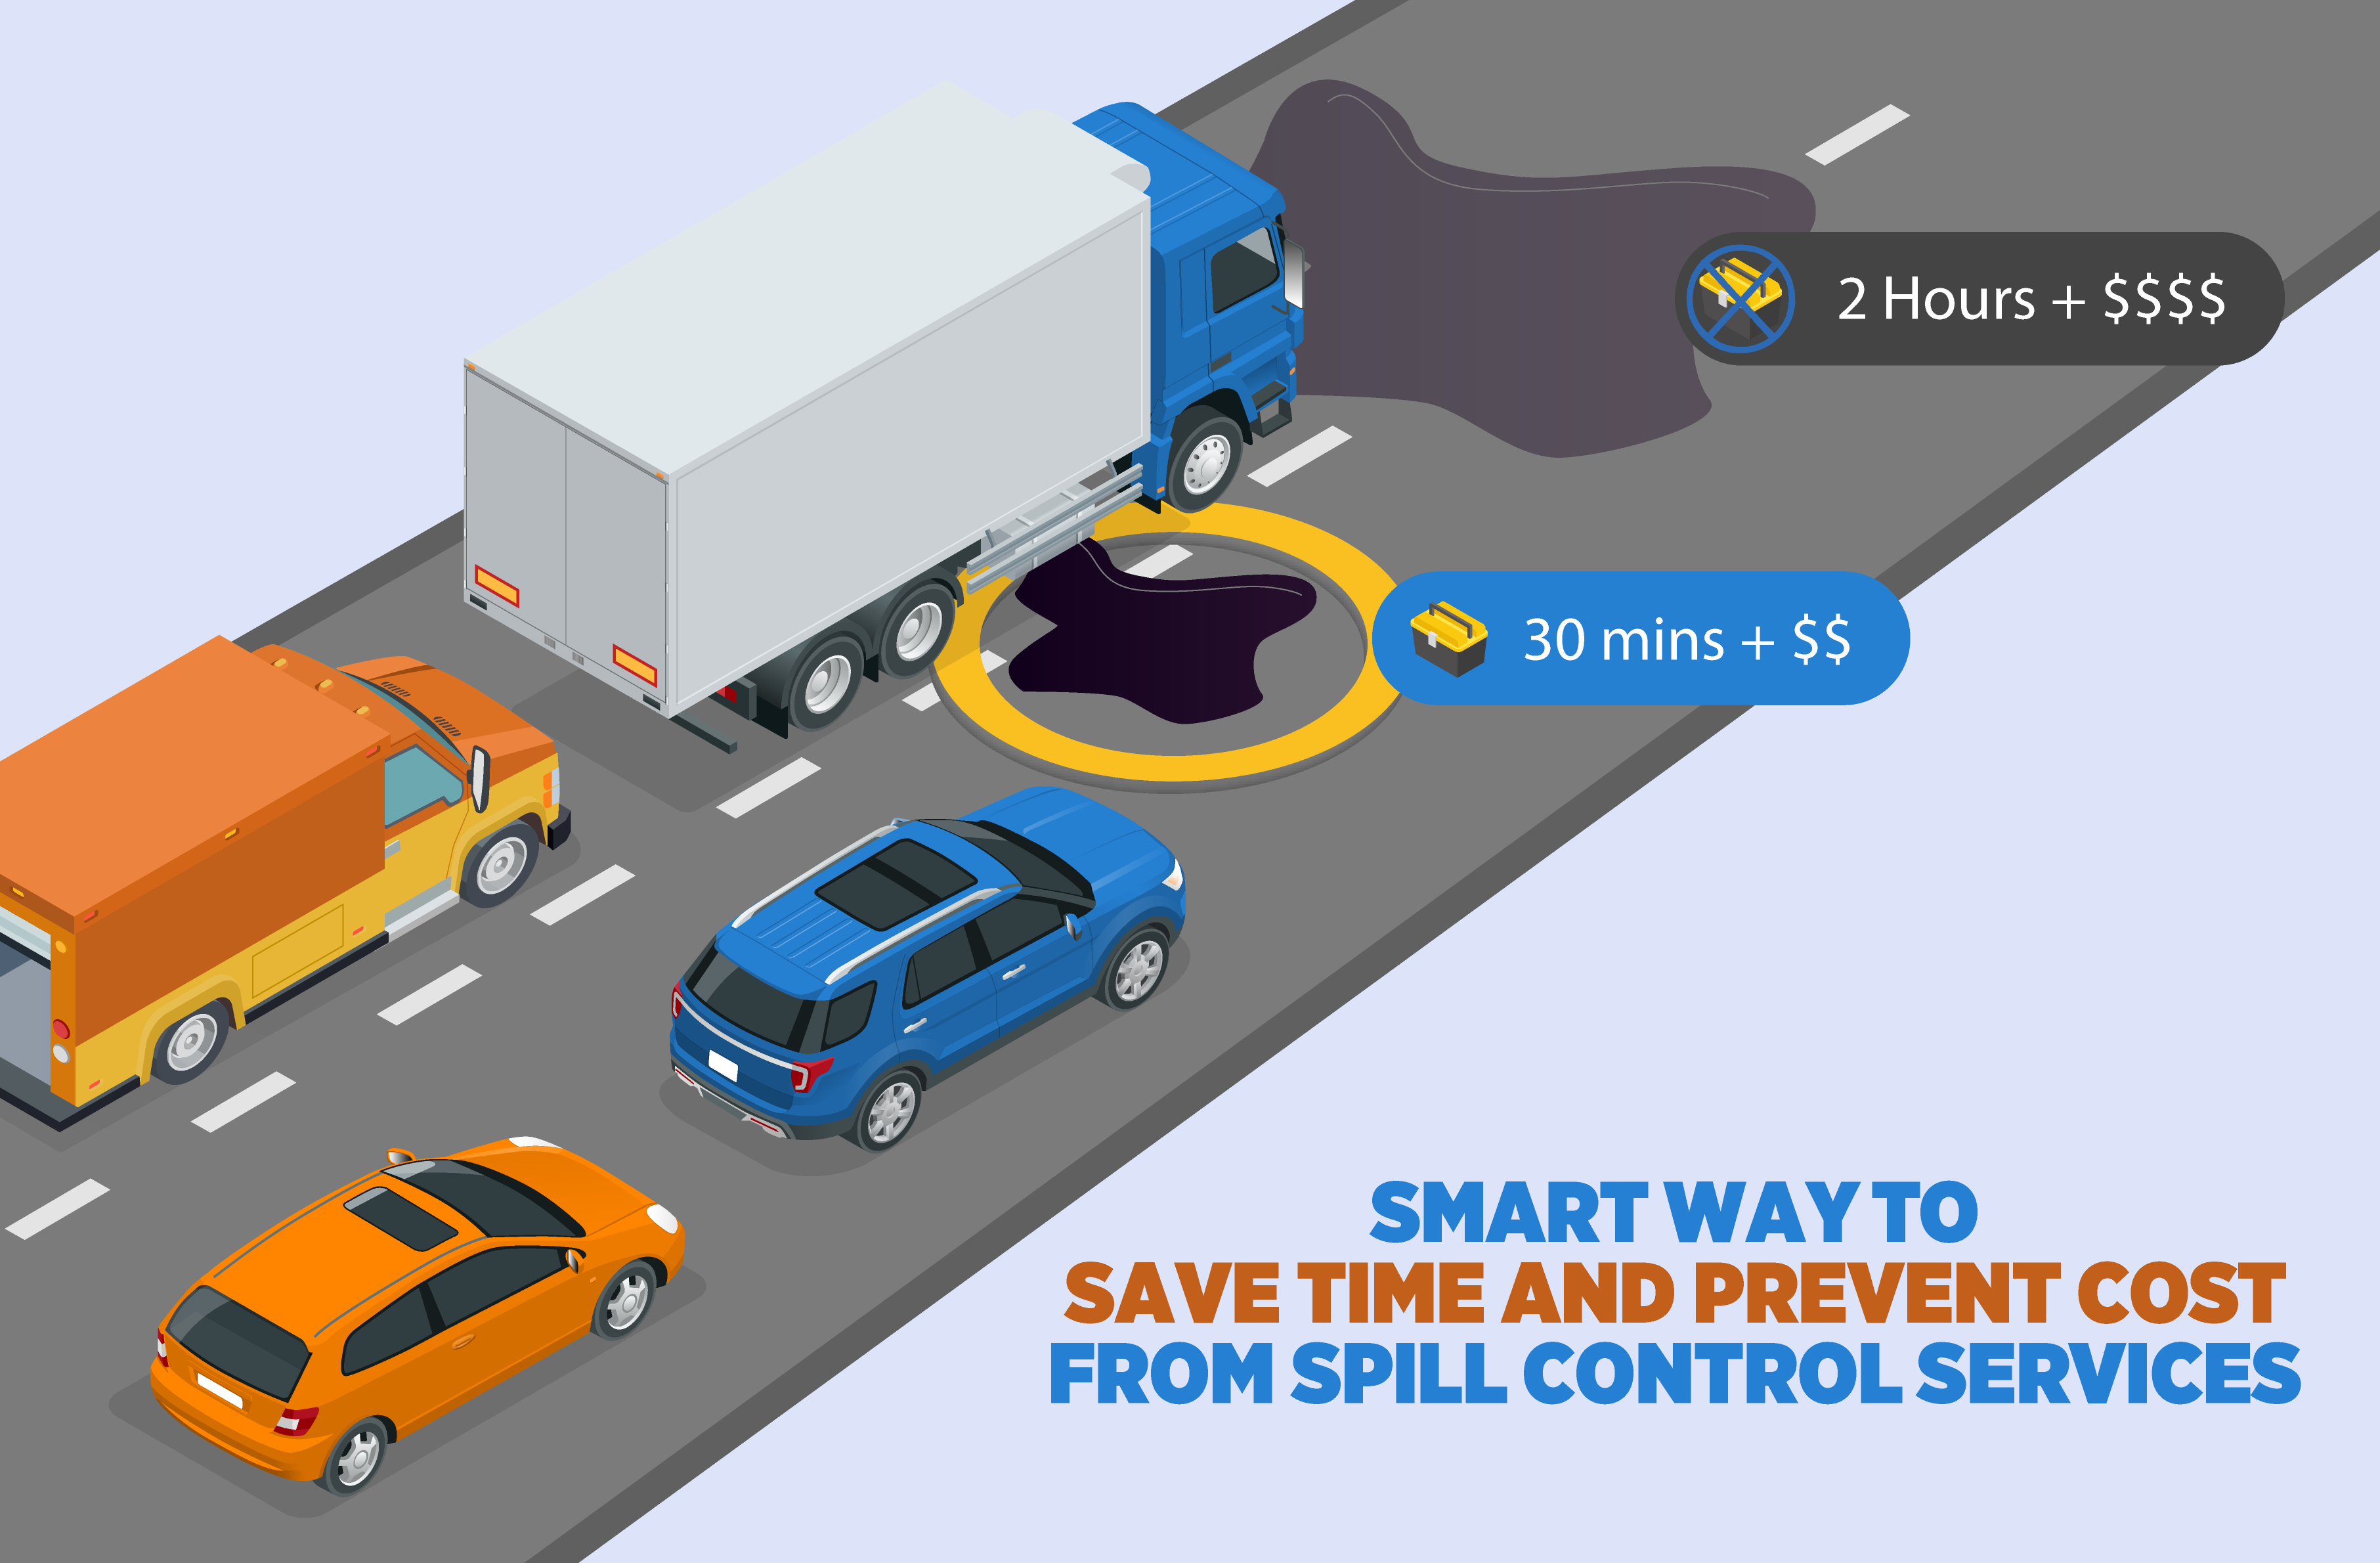 Everything you need to know about Vehicle Spill Kits - Advantages, Usage, and Tips